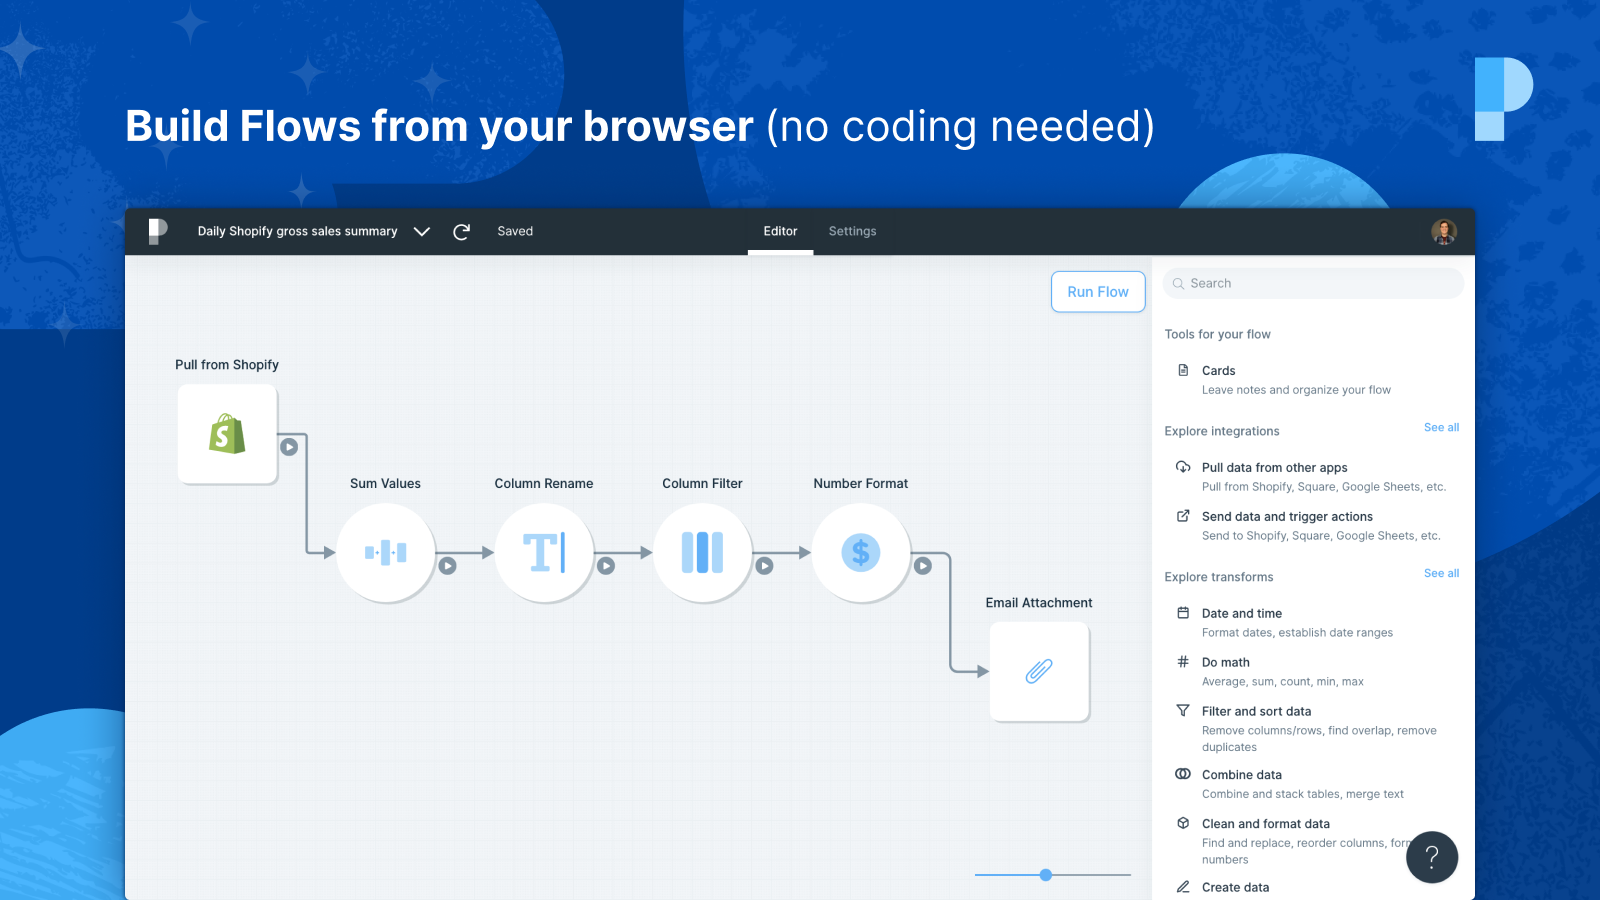 Build flows from your browser (no coding needed)